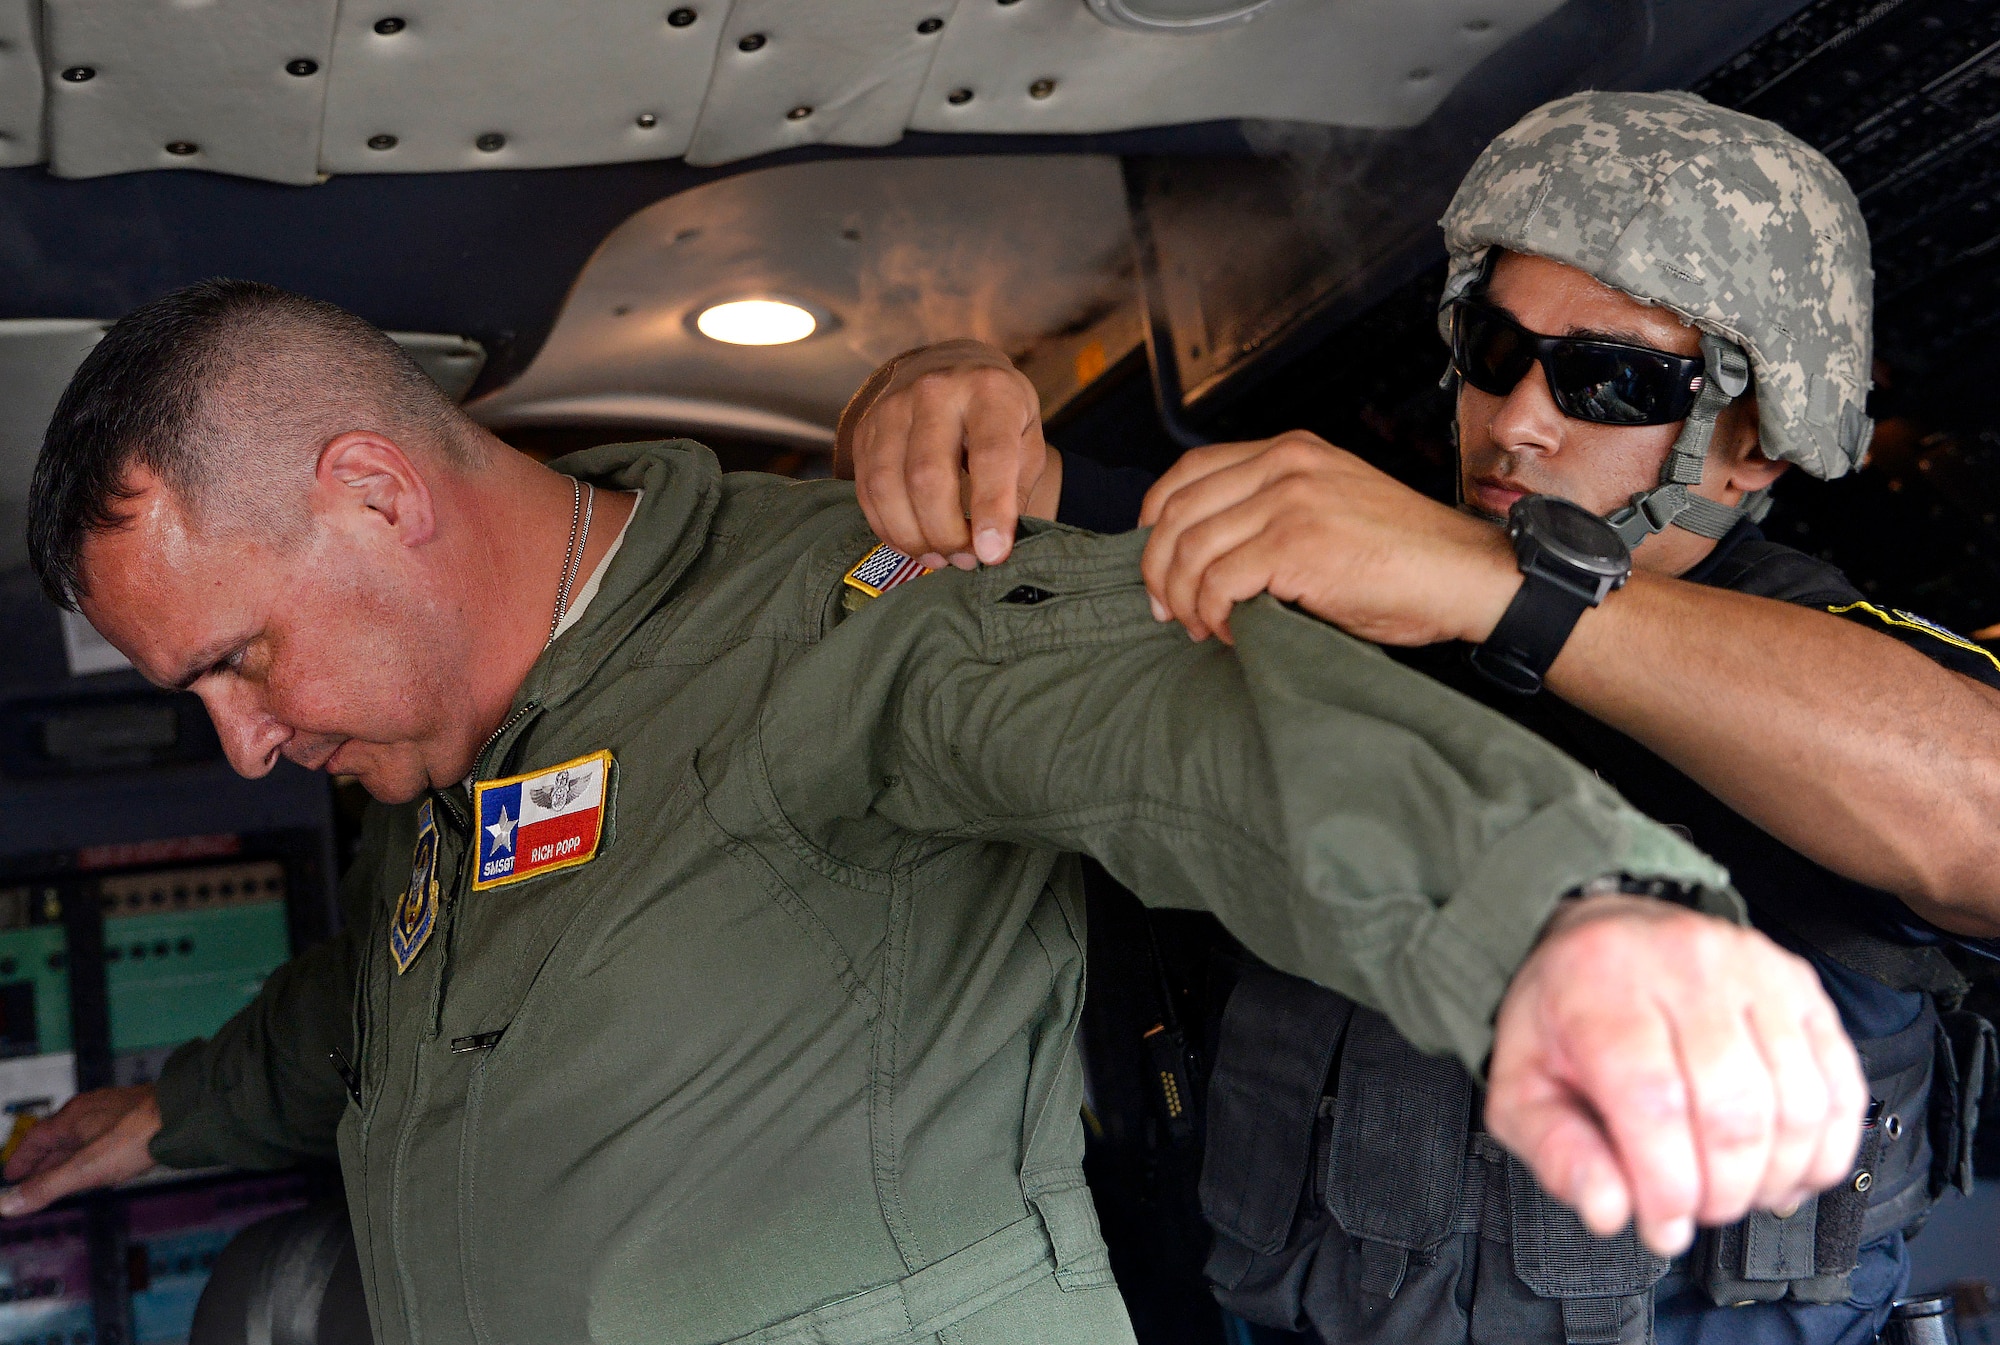 Officer Gilberto Quintero, 802nd Security Forces emergency services team member, searches Senior Master Sgt. Rich Popp, 433rd Operations Group chief loadmaster, during an anti-hijacking exercise Oct. 5, 2016 at Joint Base San Antonio-Lackland, Texas. The 502nd Air Base Wing, 433rd Airlift Wing, and 59th Medical Wing held a joint anti-hijacking exercise to evaluate emergency services reaction time to a real-world hijacking scenario. (U.S. Air Force photo by Benjamin Faske)